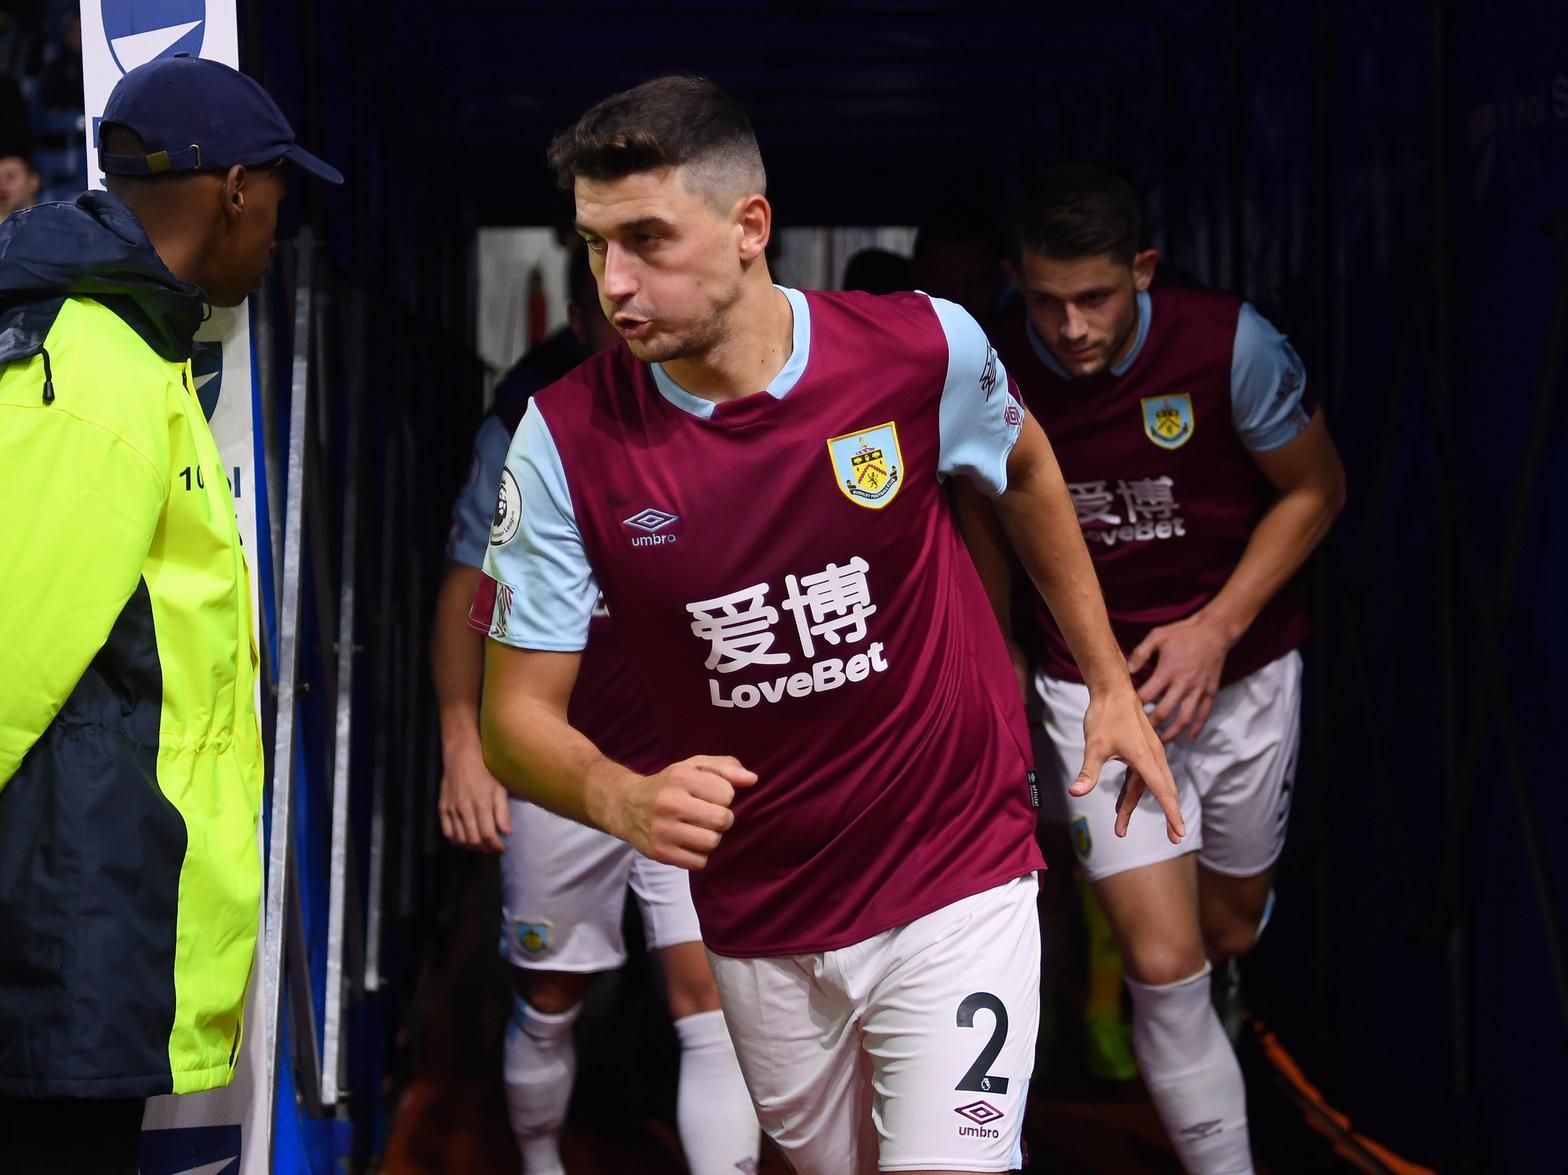 Another superb display from the Burnley full back. It looked as though it was going to be a long afternoon at first, but stuck to his task and did incredibly well up against Saka and Aubameyang.